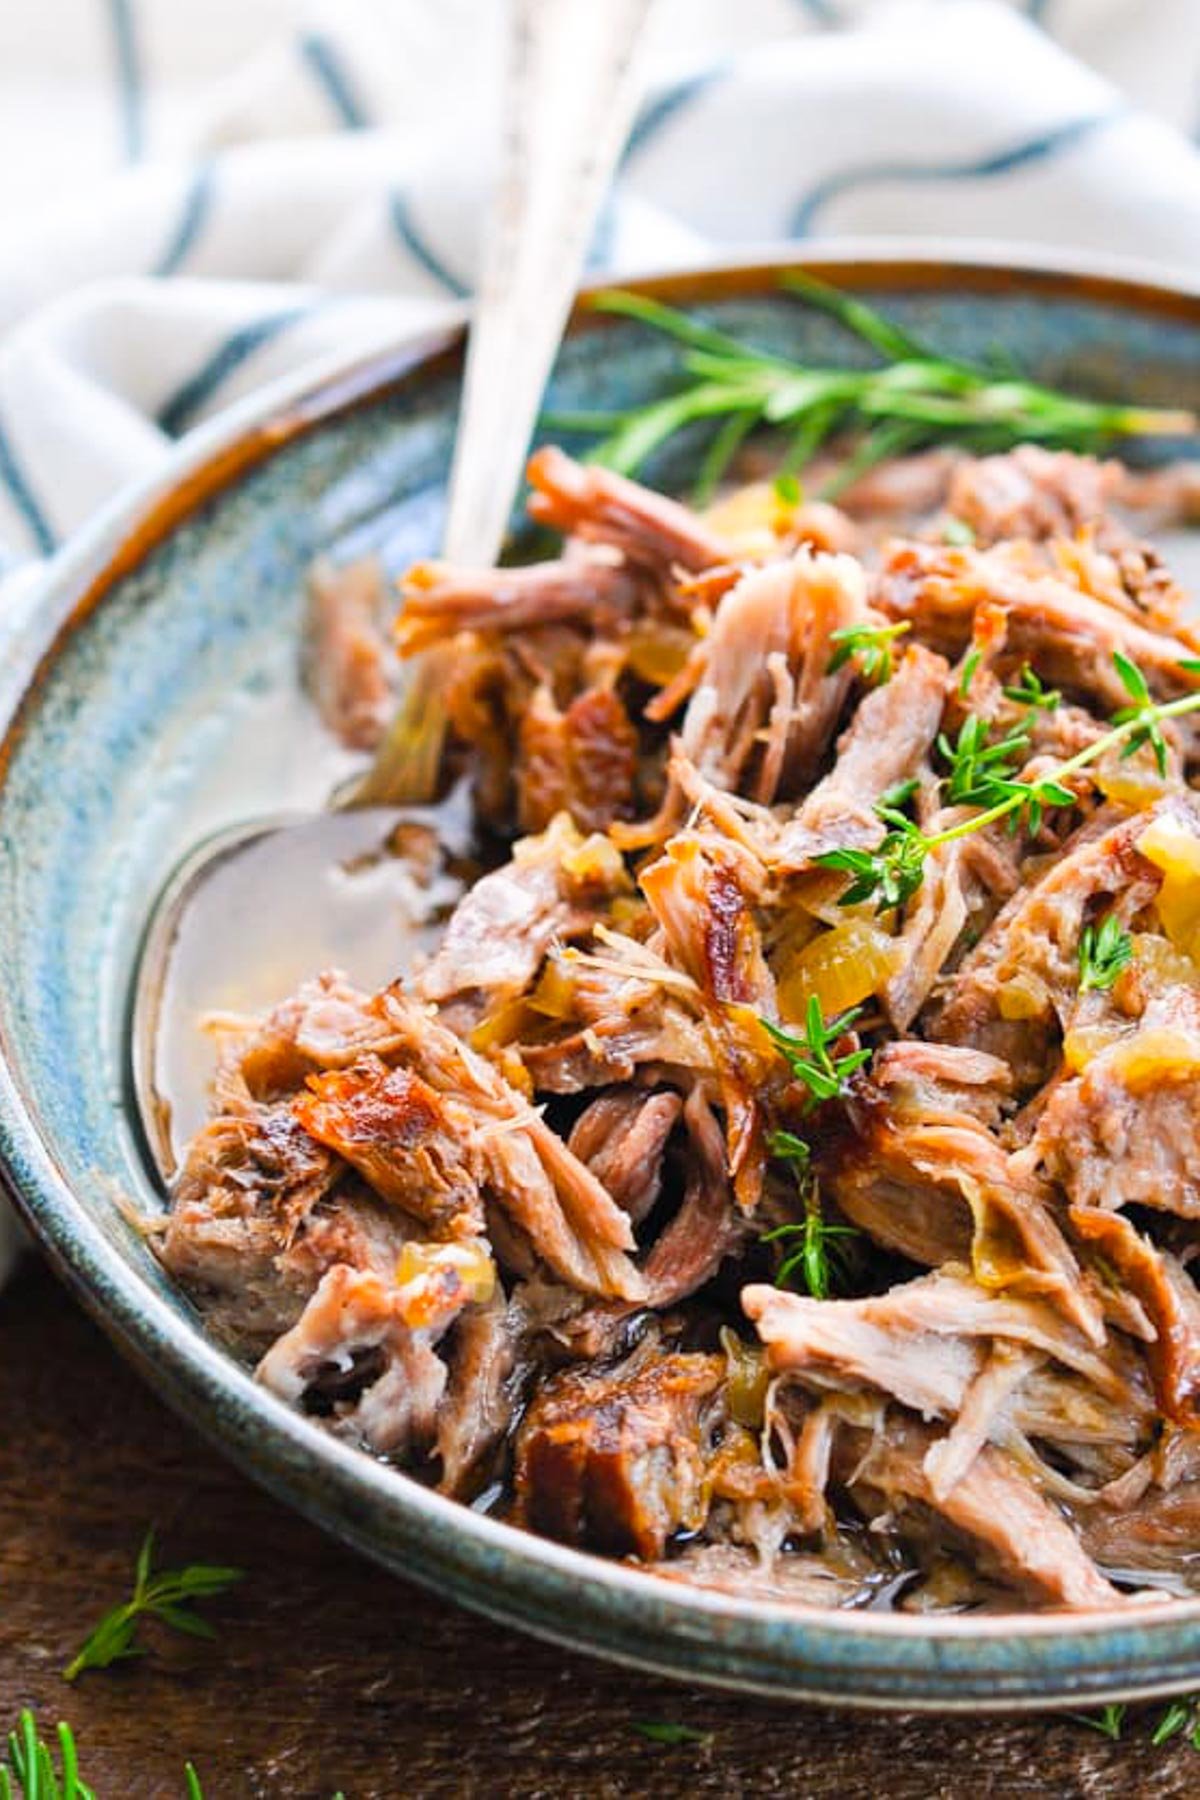 Pulled Pork Too Sweet: Reasons Why & How To Fix